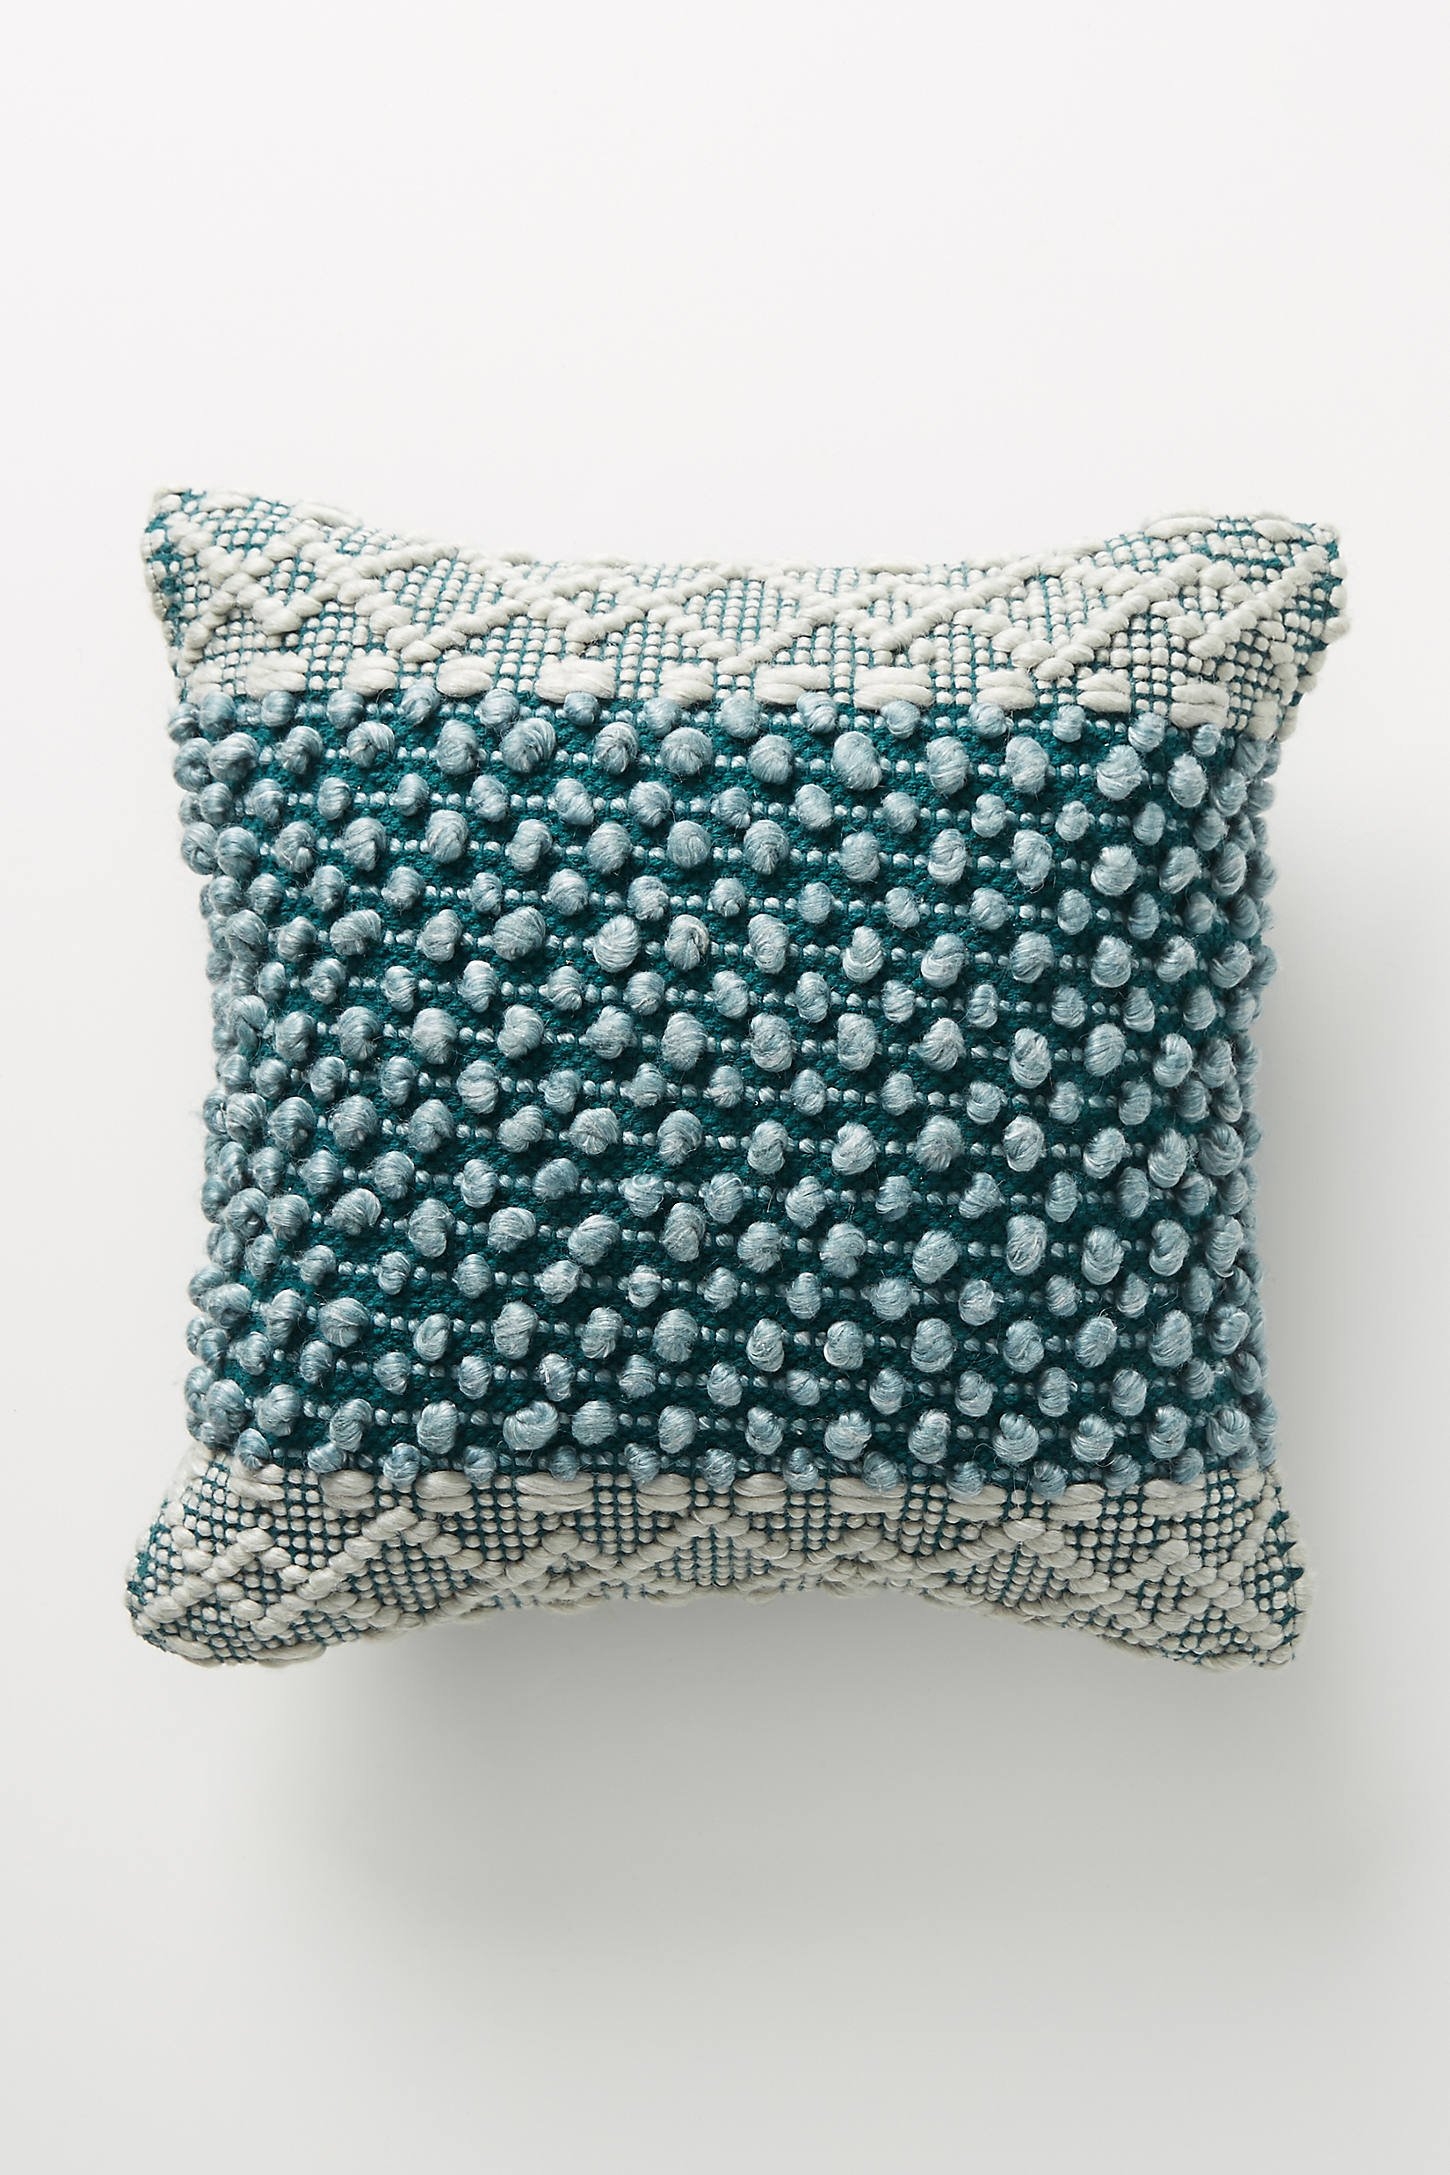 Joanna Gaines for Anthropologie Textured Eva Pillow - Image 0